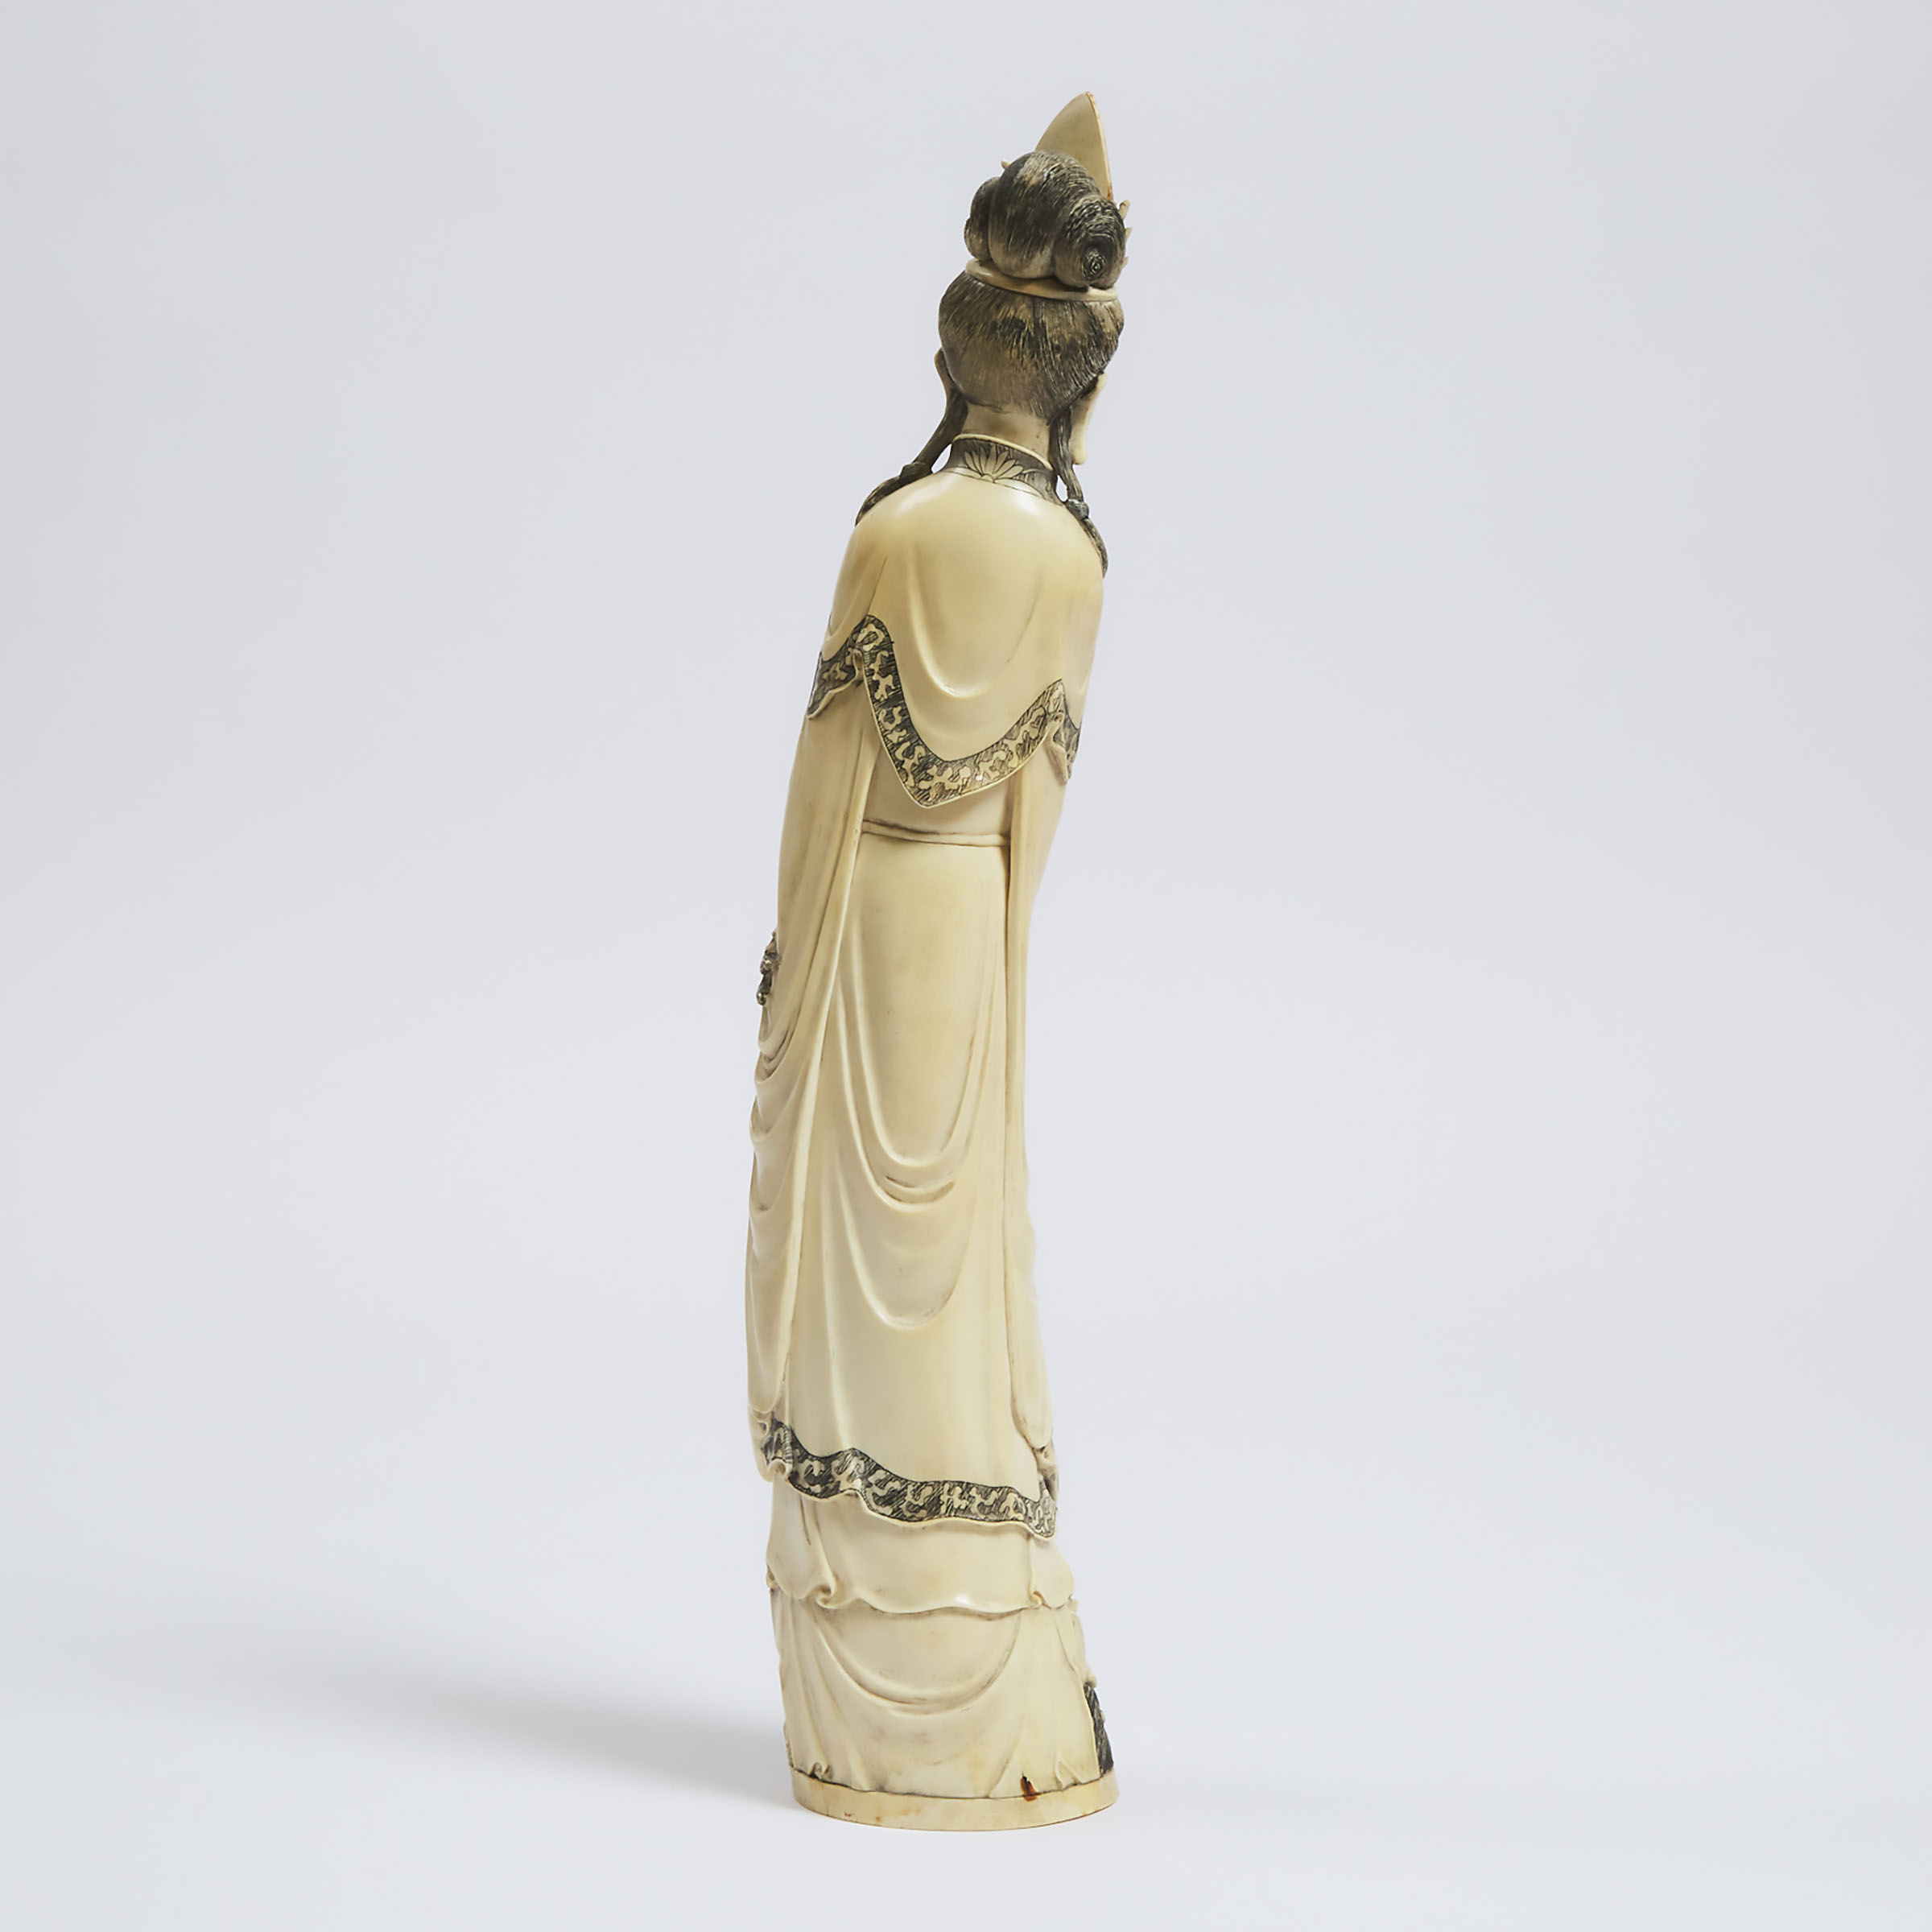 A Large Ivory Figure of Guanyin Holding a Basket With Fish, Early to Mid 20th Century